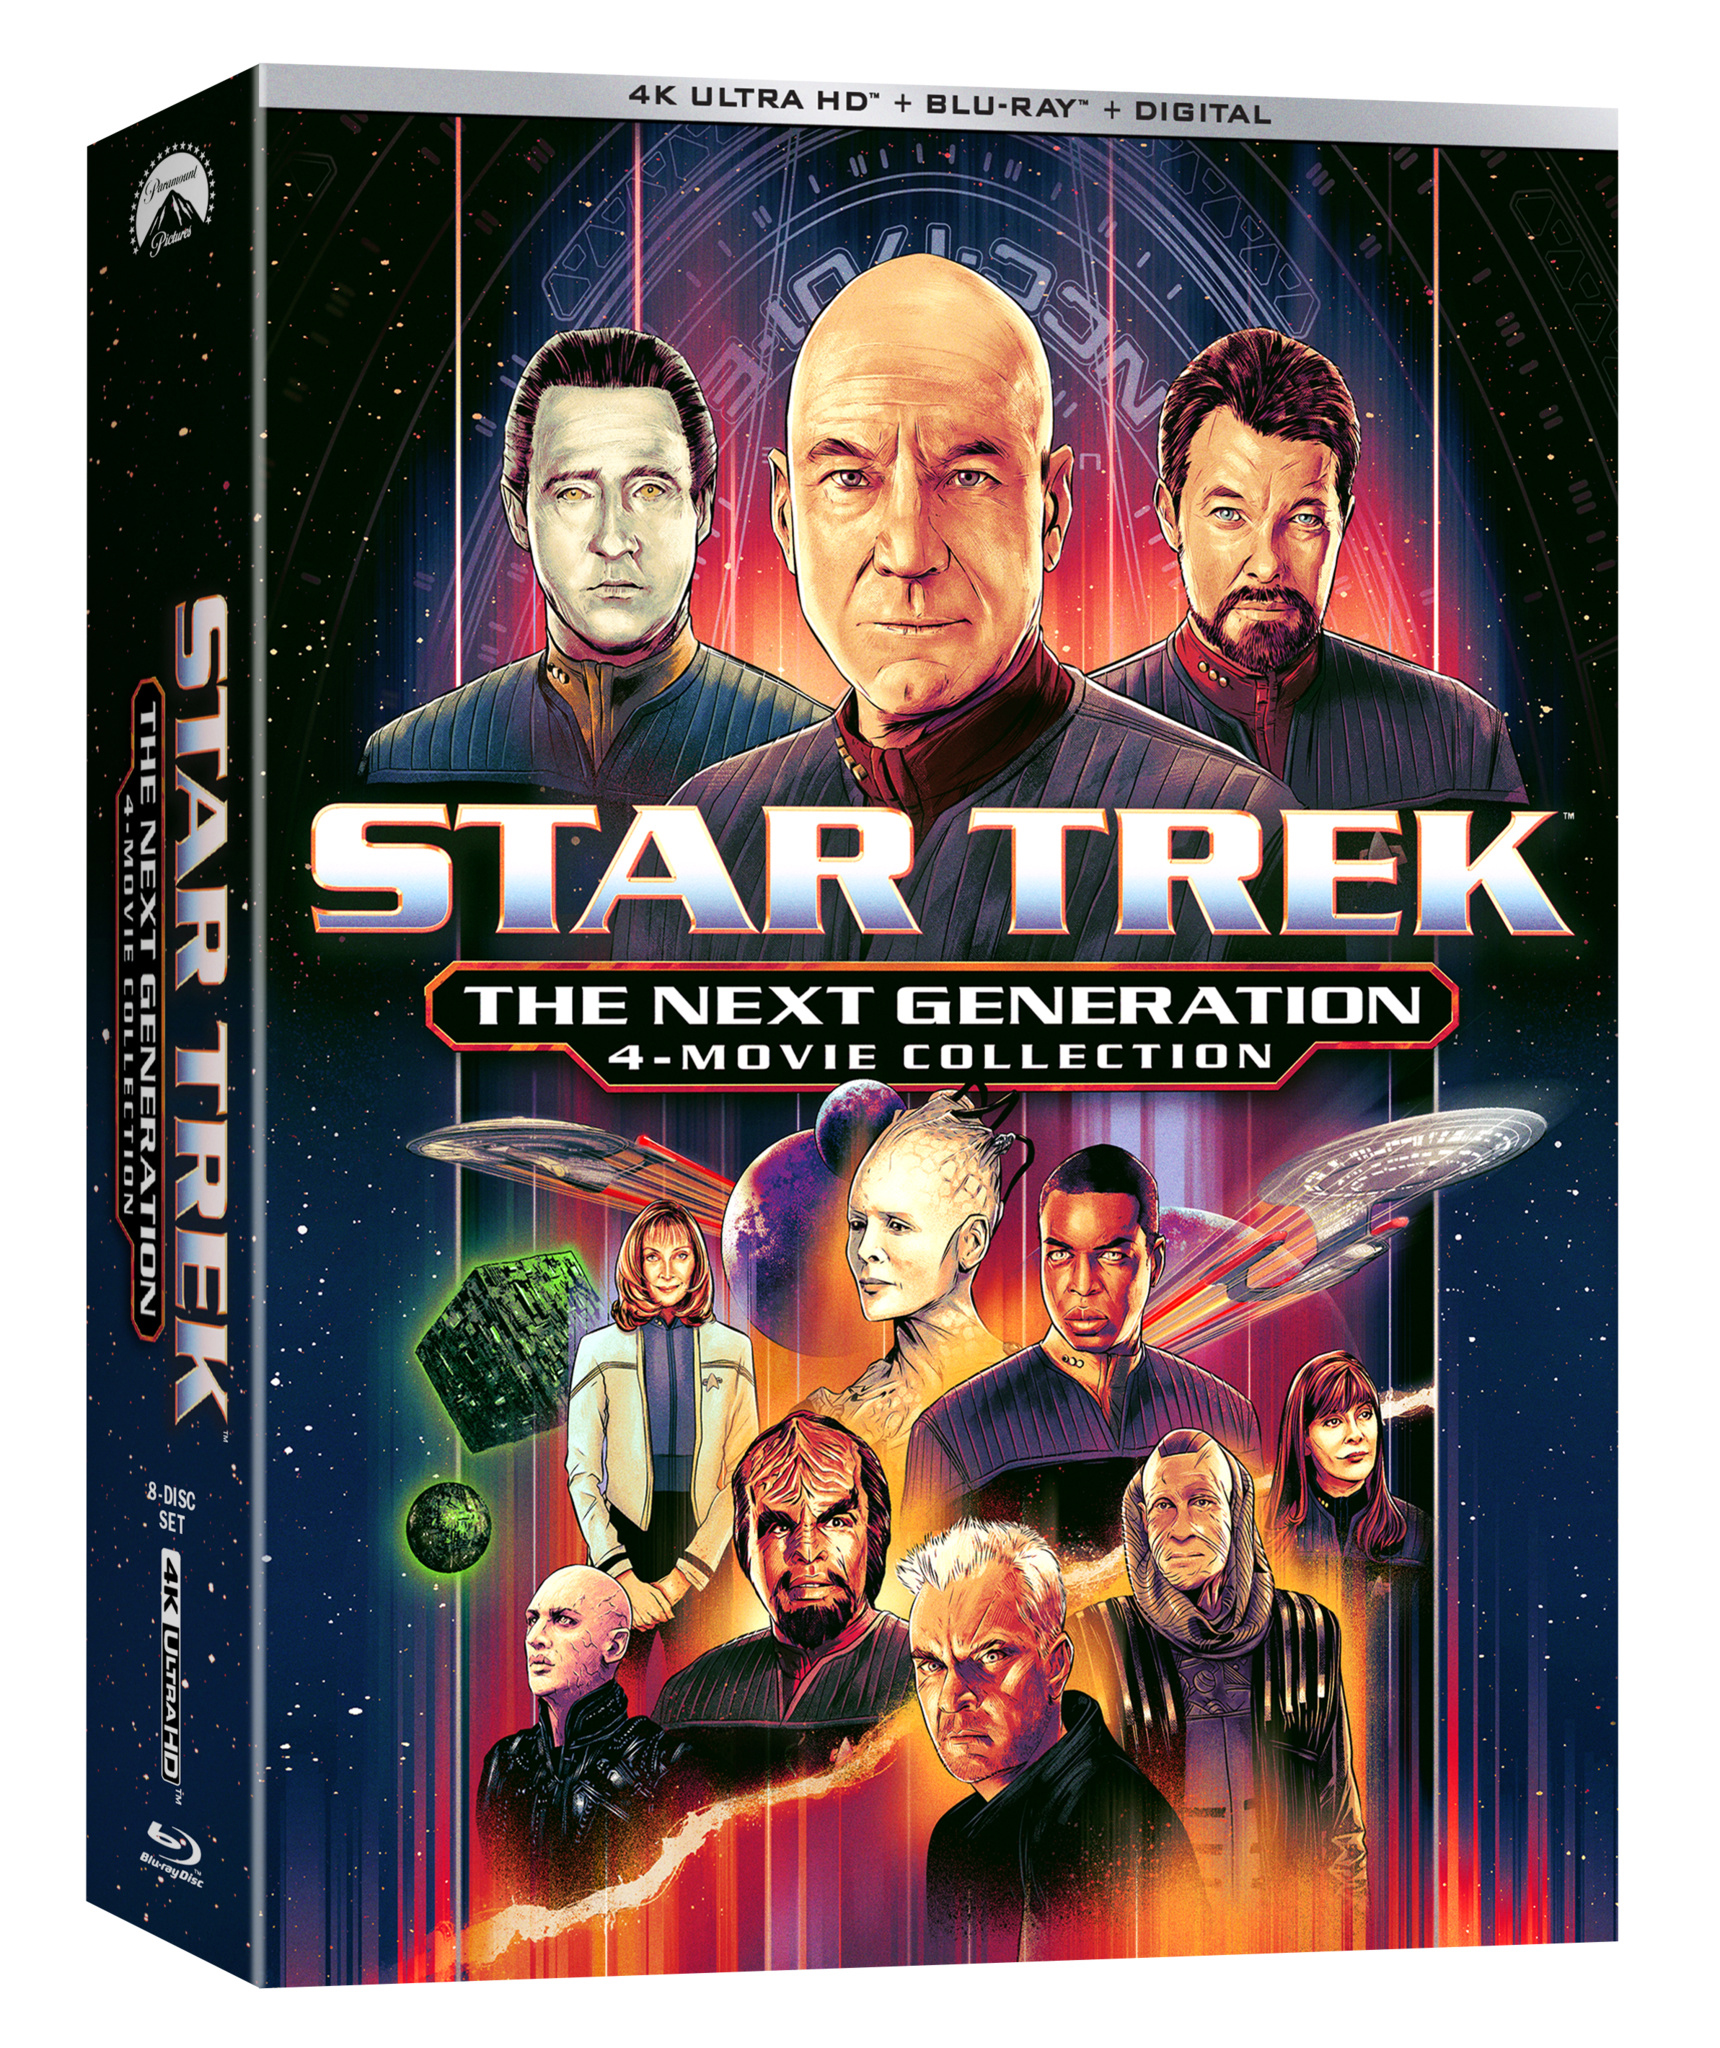 Star Trek: The Next Generation Motion Picture Collection [Dig. Copy] [4K Ultra HD Blu-ray/Blu-ray]